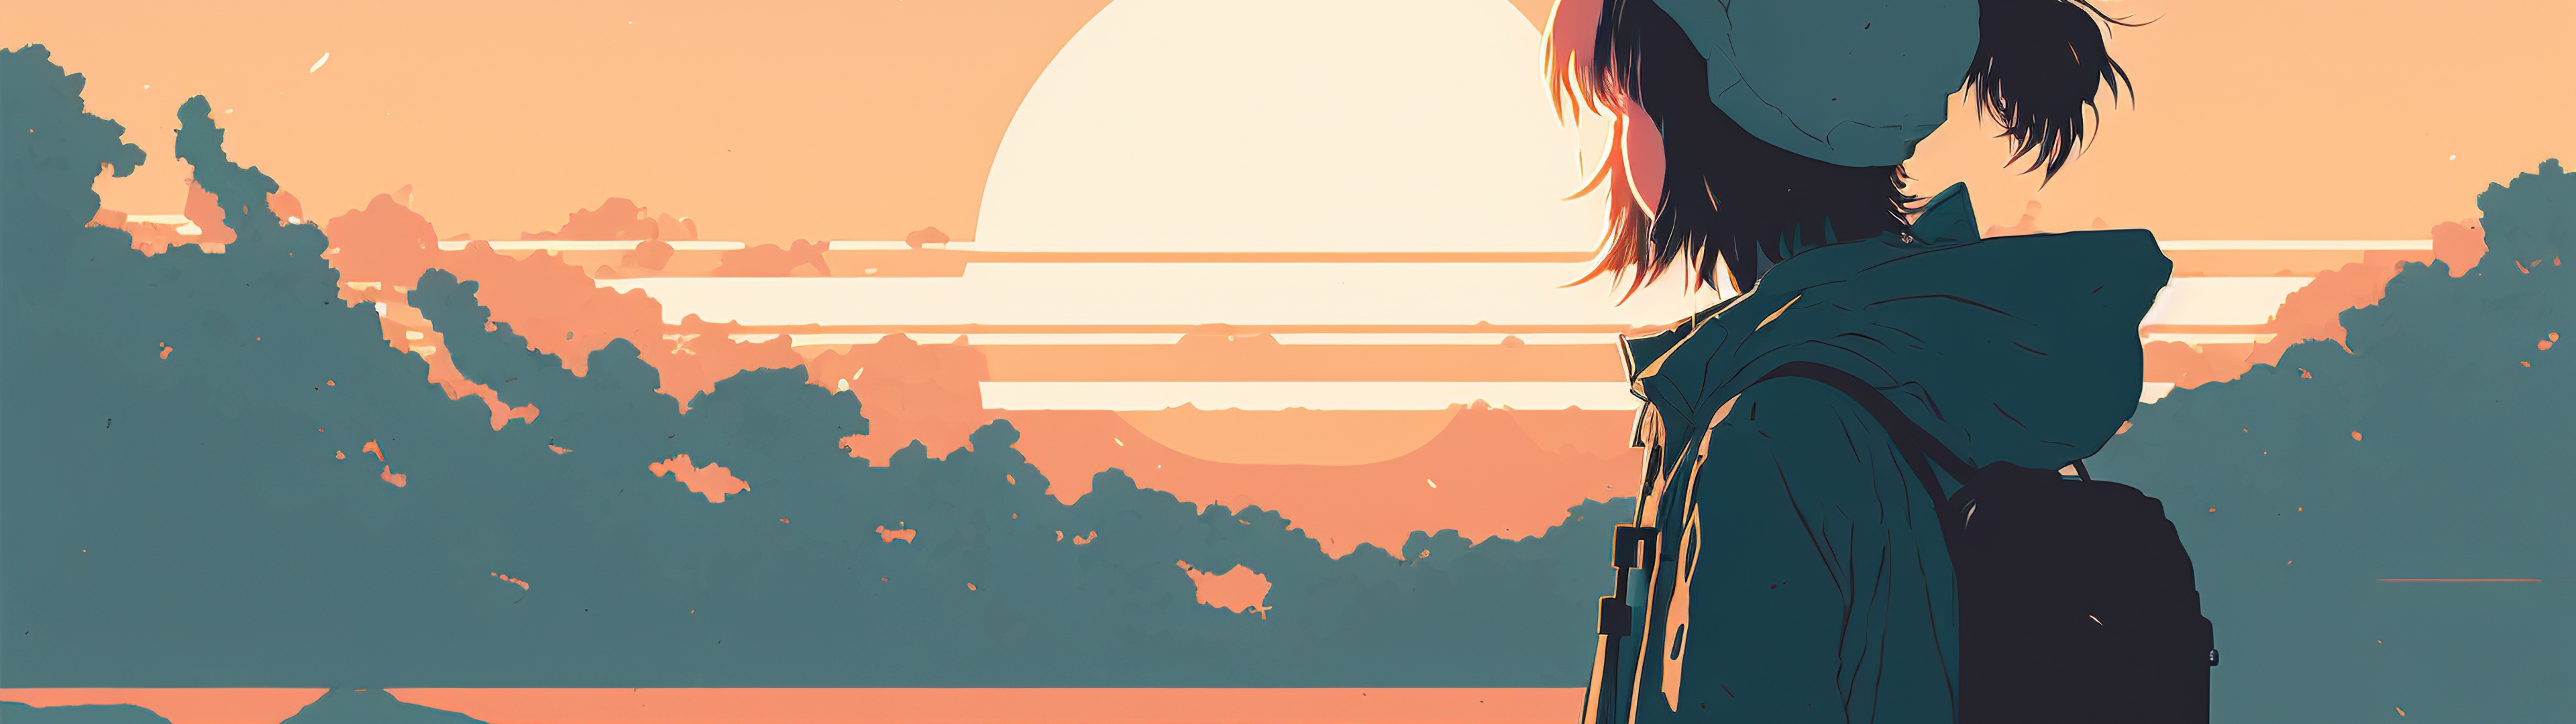 Anime Wallpaper 3840x1080 72 images